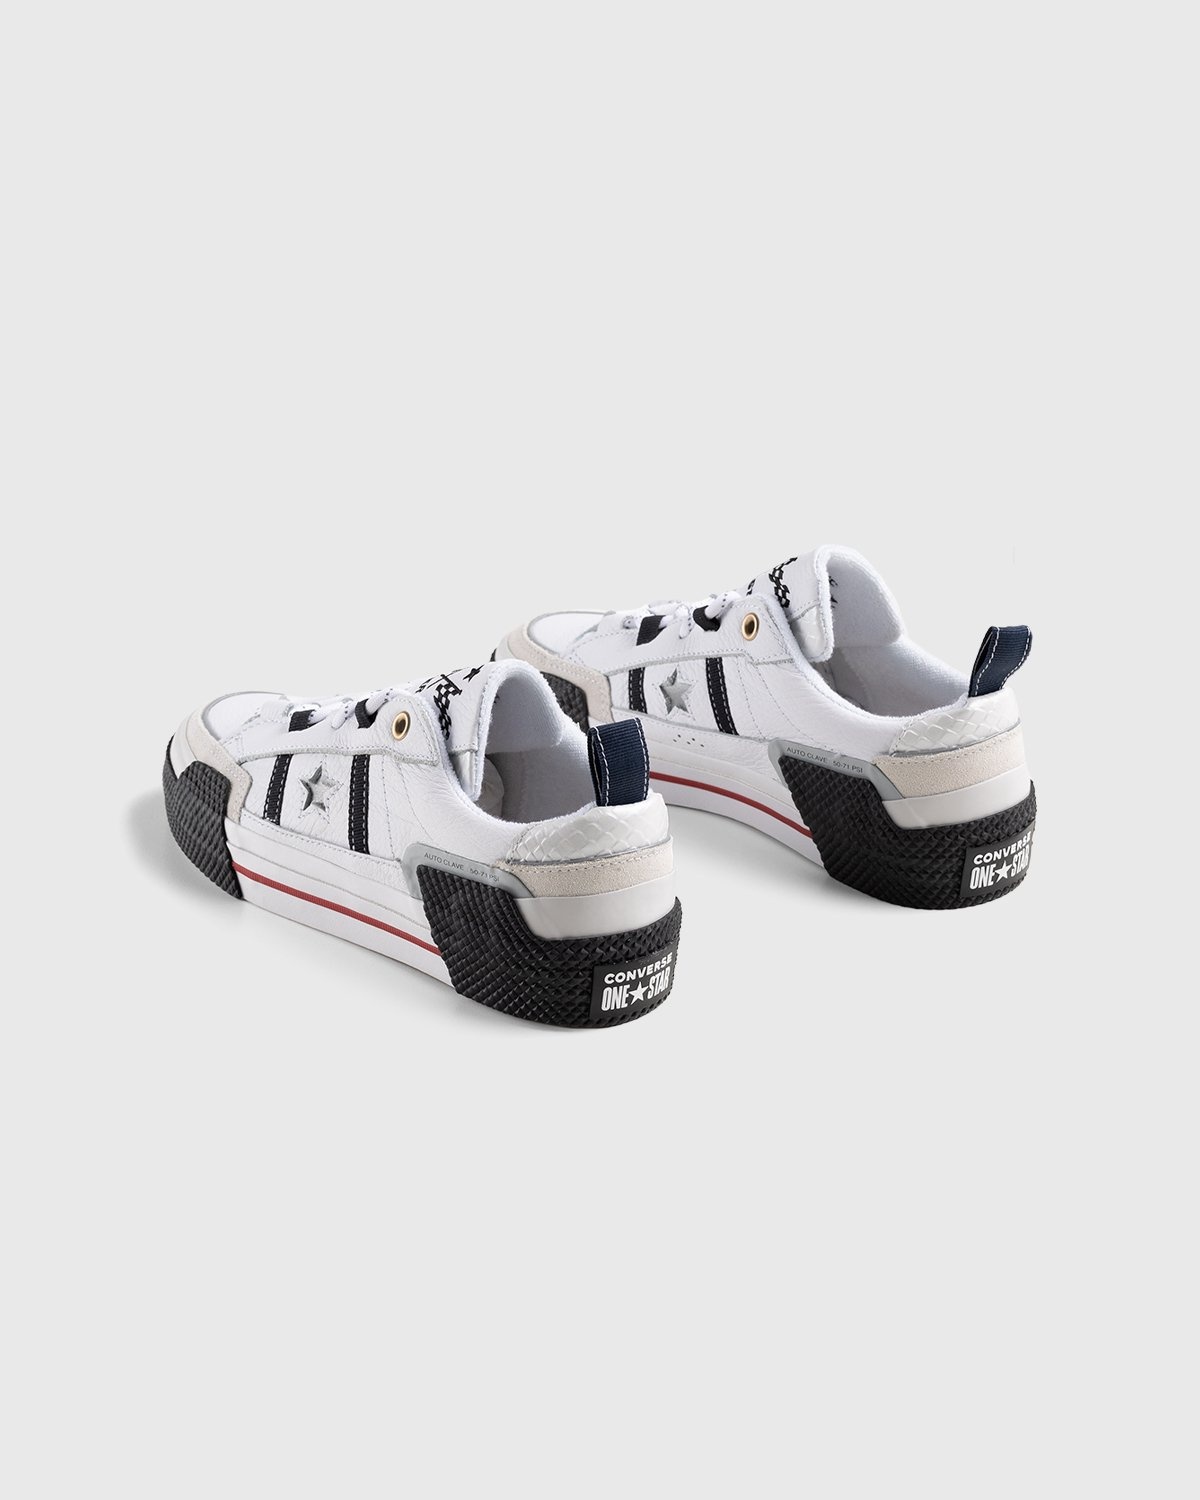 Converse x IBN Japser – One Star Ox White/Black/White - Sneakers - White - Image 3